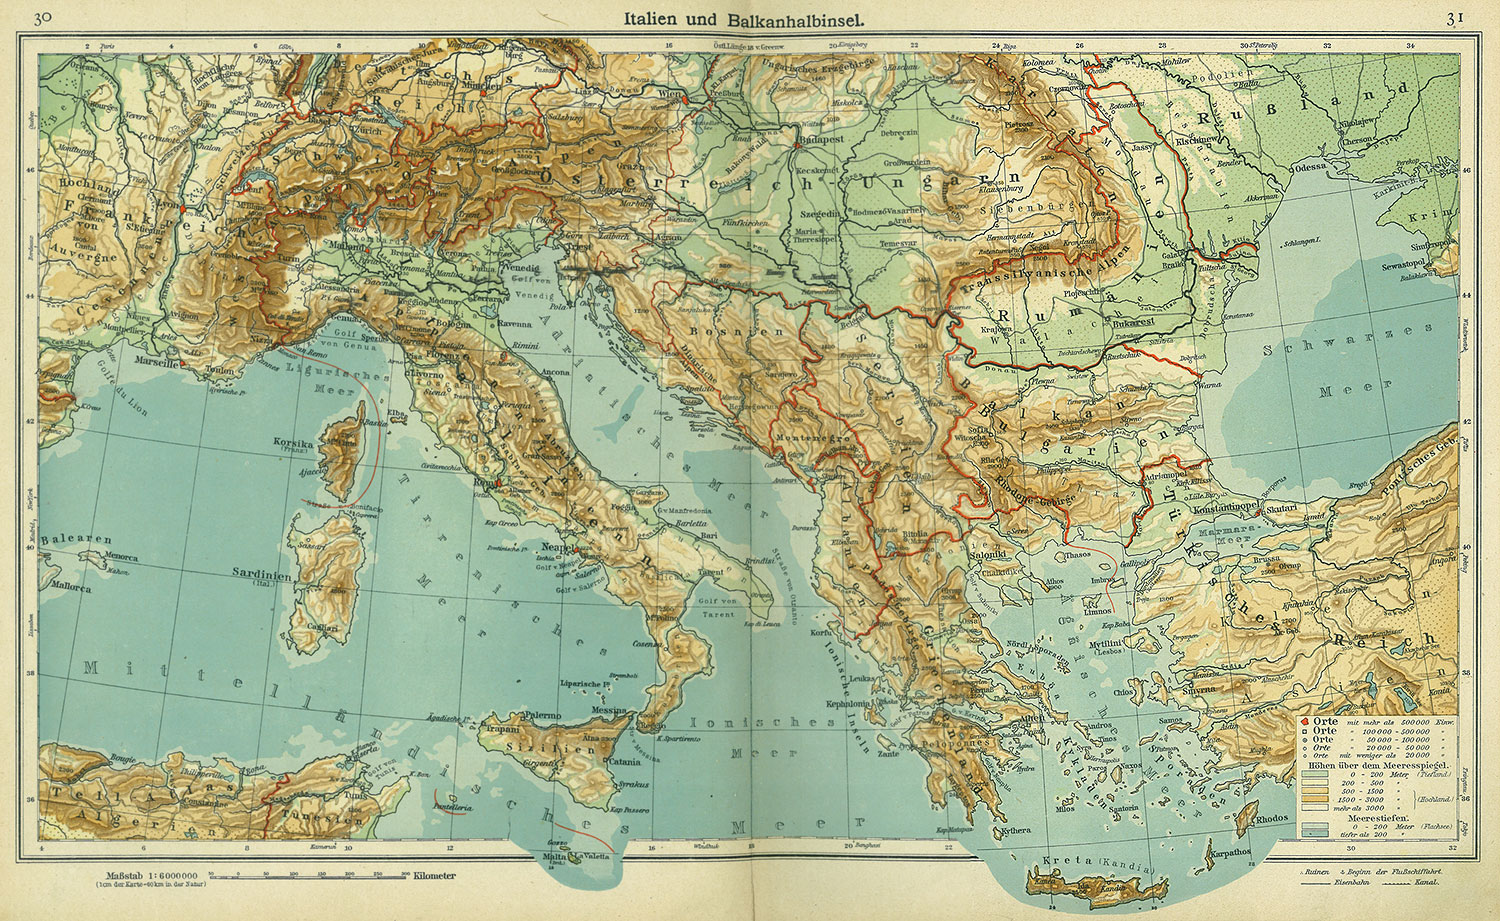 Italy and the Balkan peninsula map, Andrees 'Berliner Schul-Atlas', 1916, pages 30 to 31, published size to print borders 43.85 cm wide by 27.02 cm high.